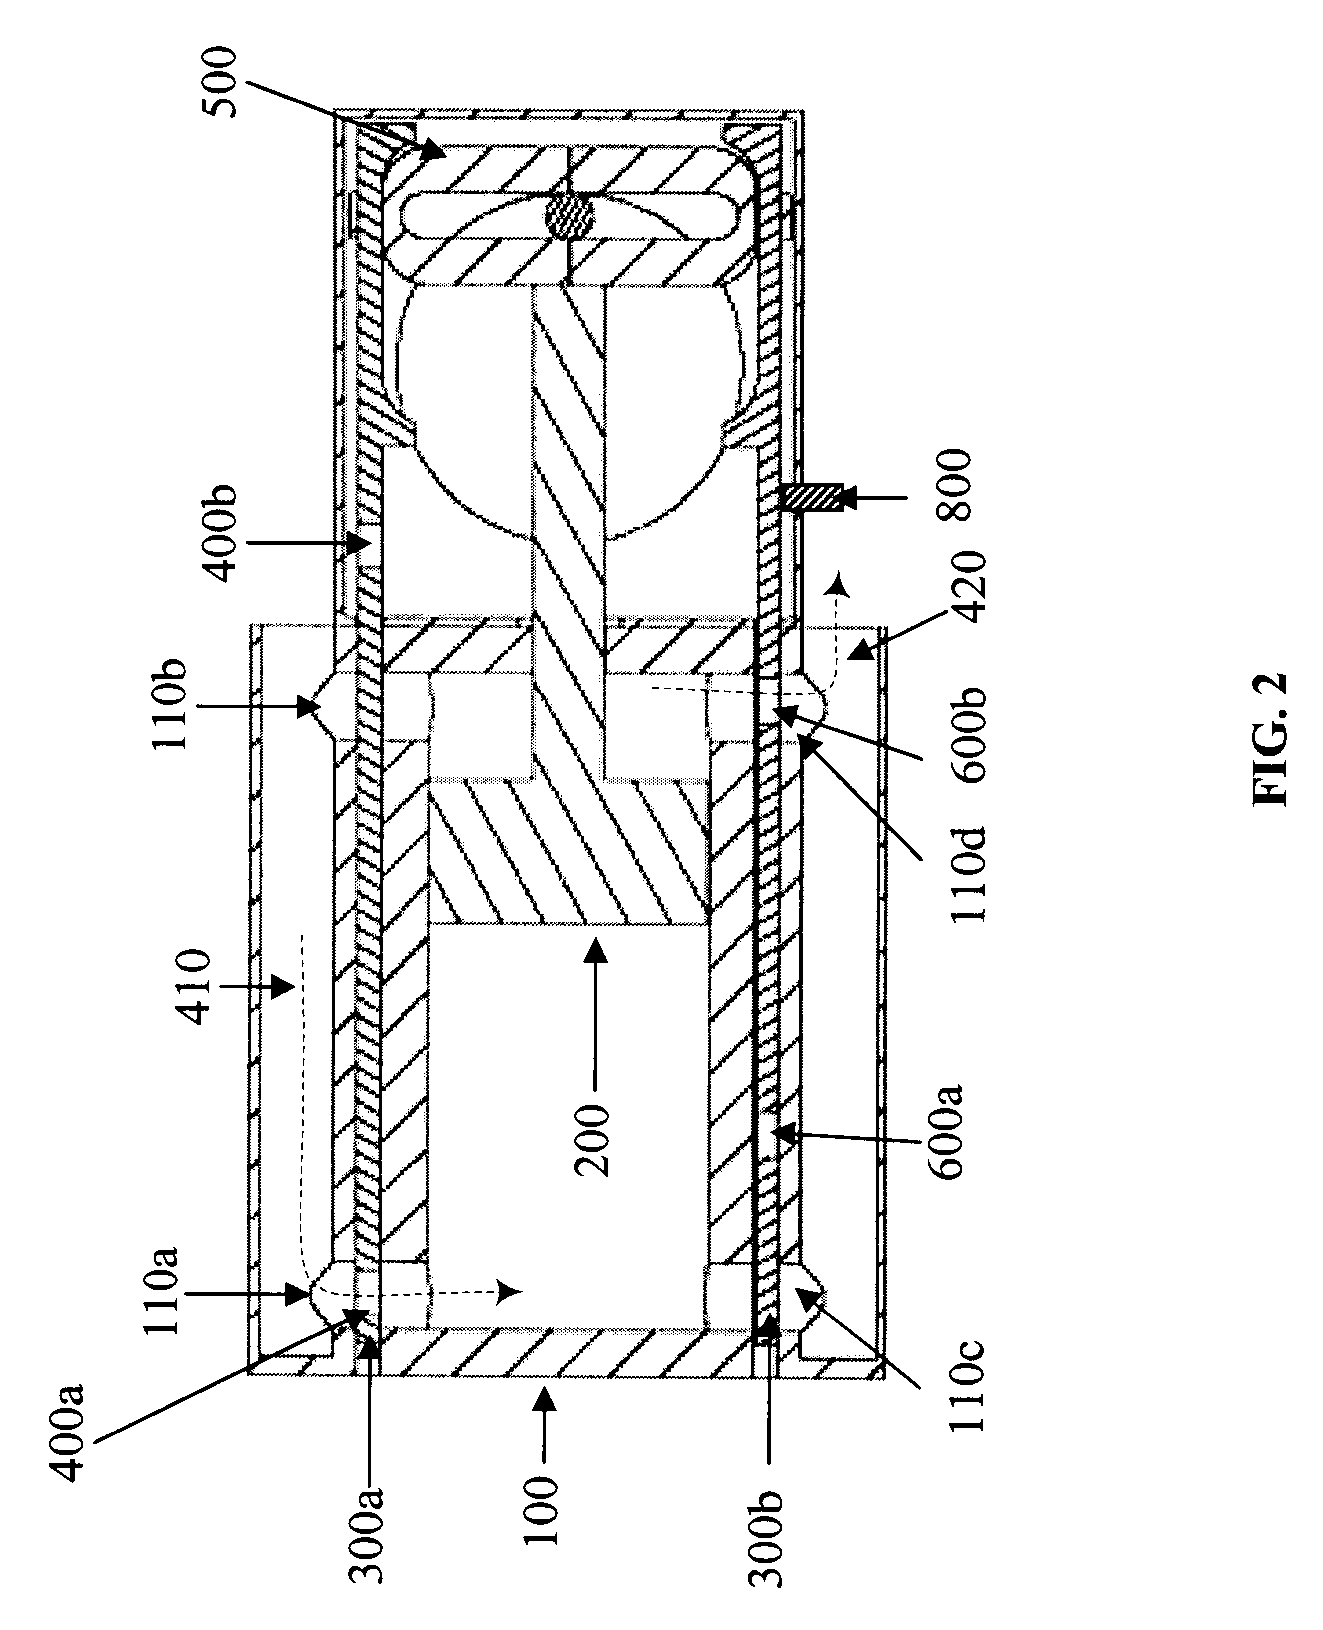 Energized Fluid Motor and Components